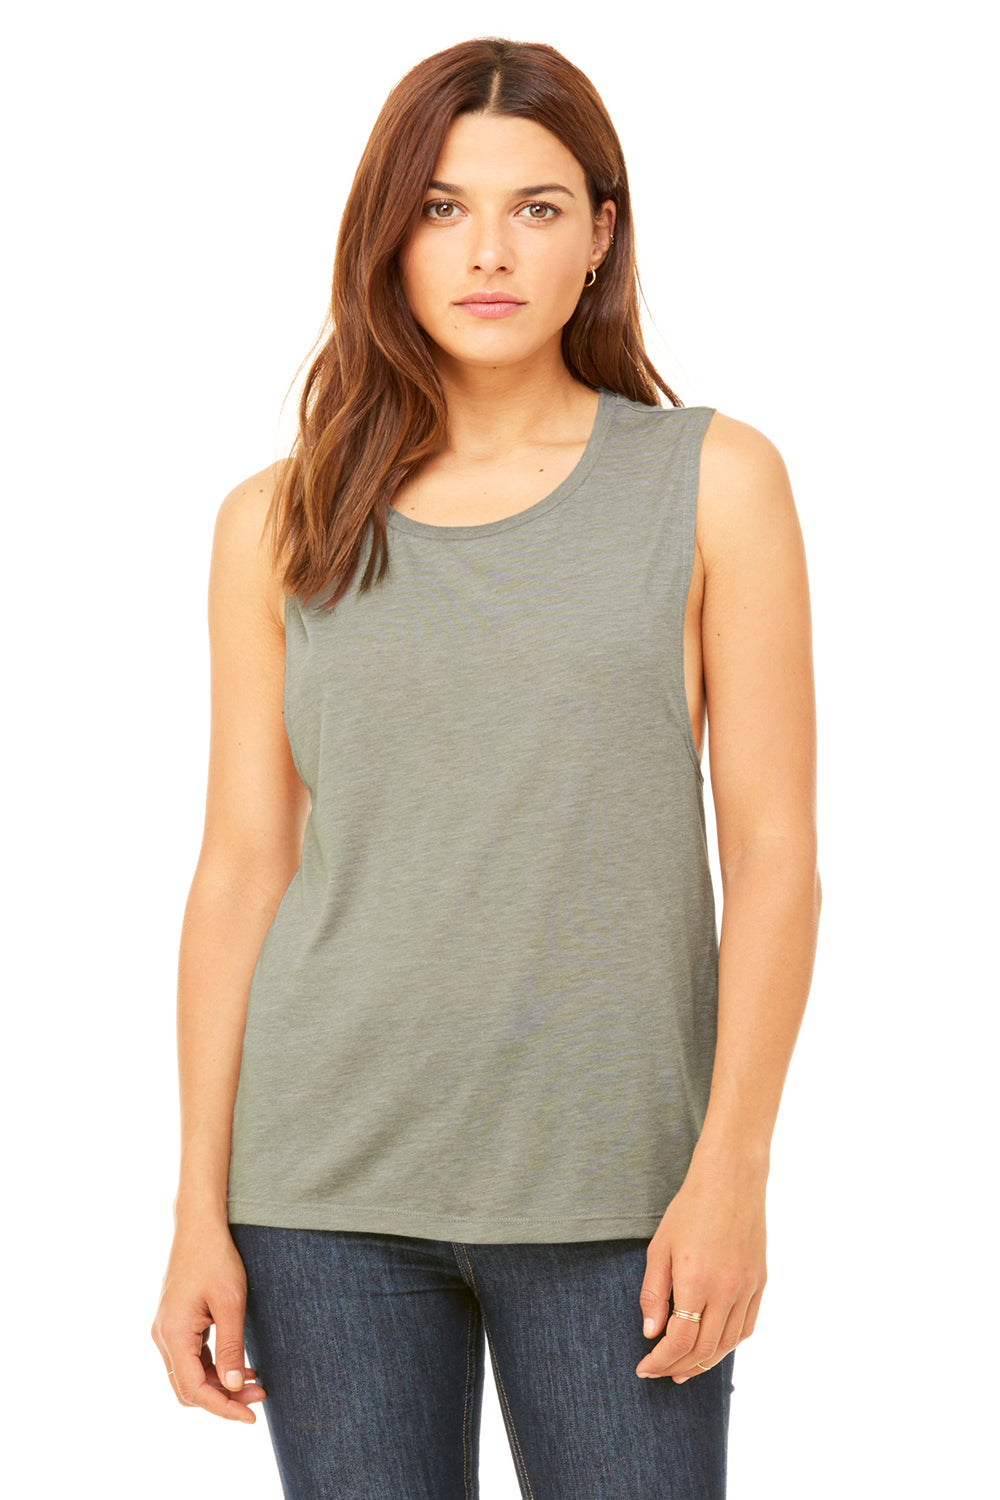 Bella + Canvas B8803 Womens Flowy Muscle Tank Top Heather Stone Brown Front